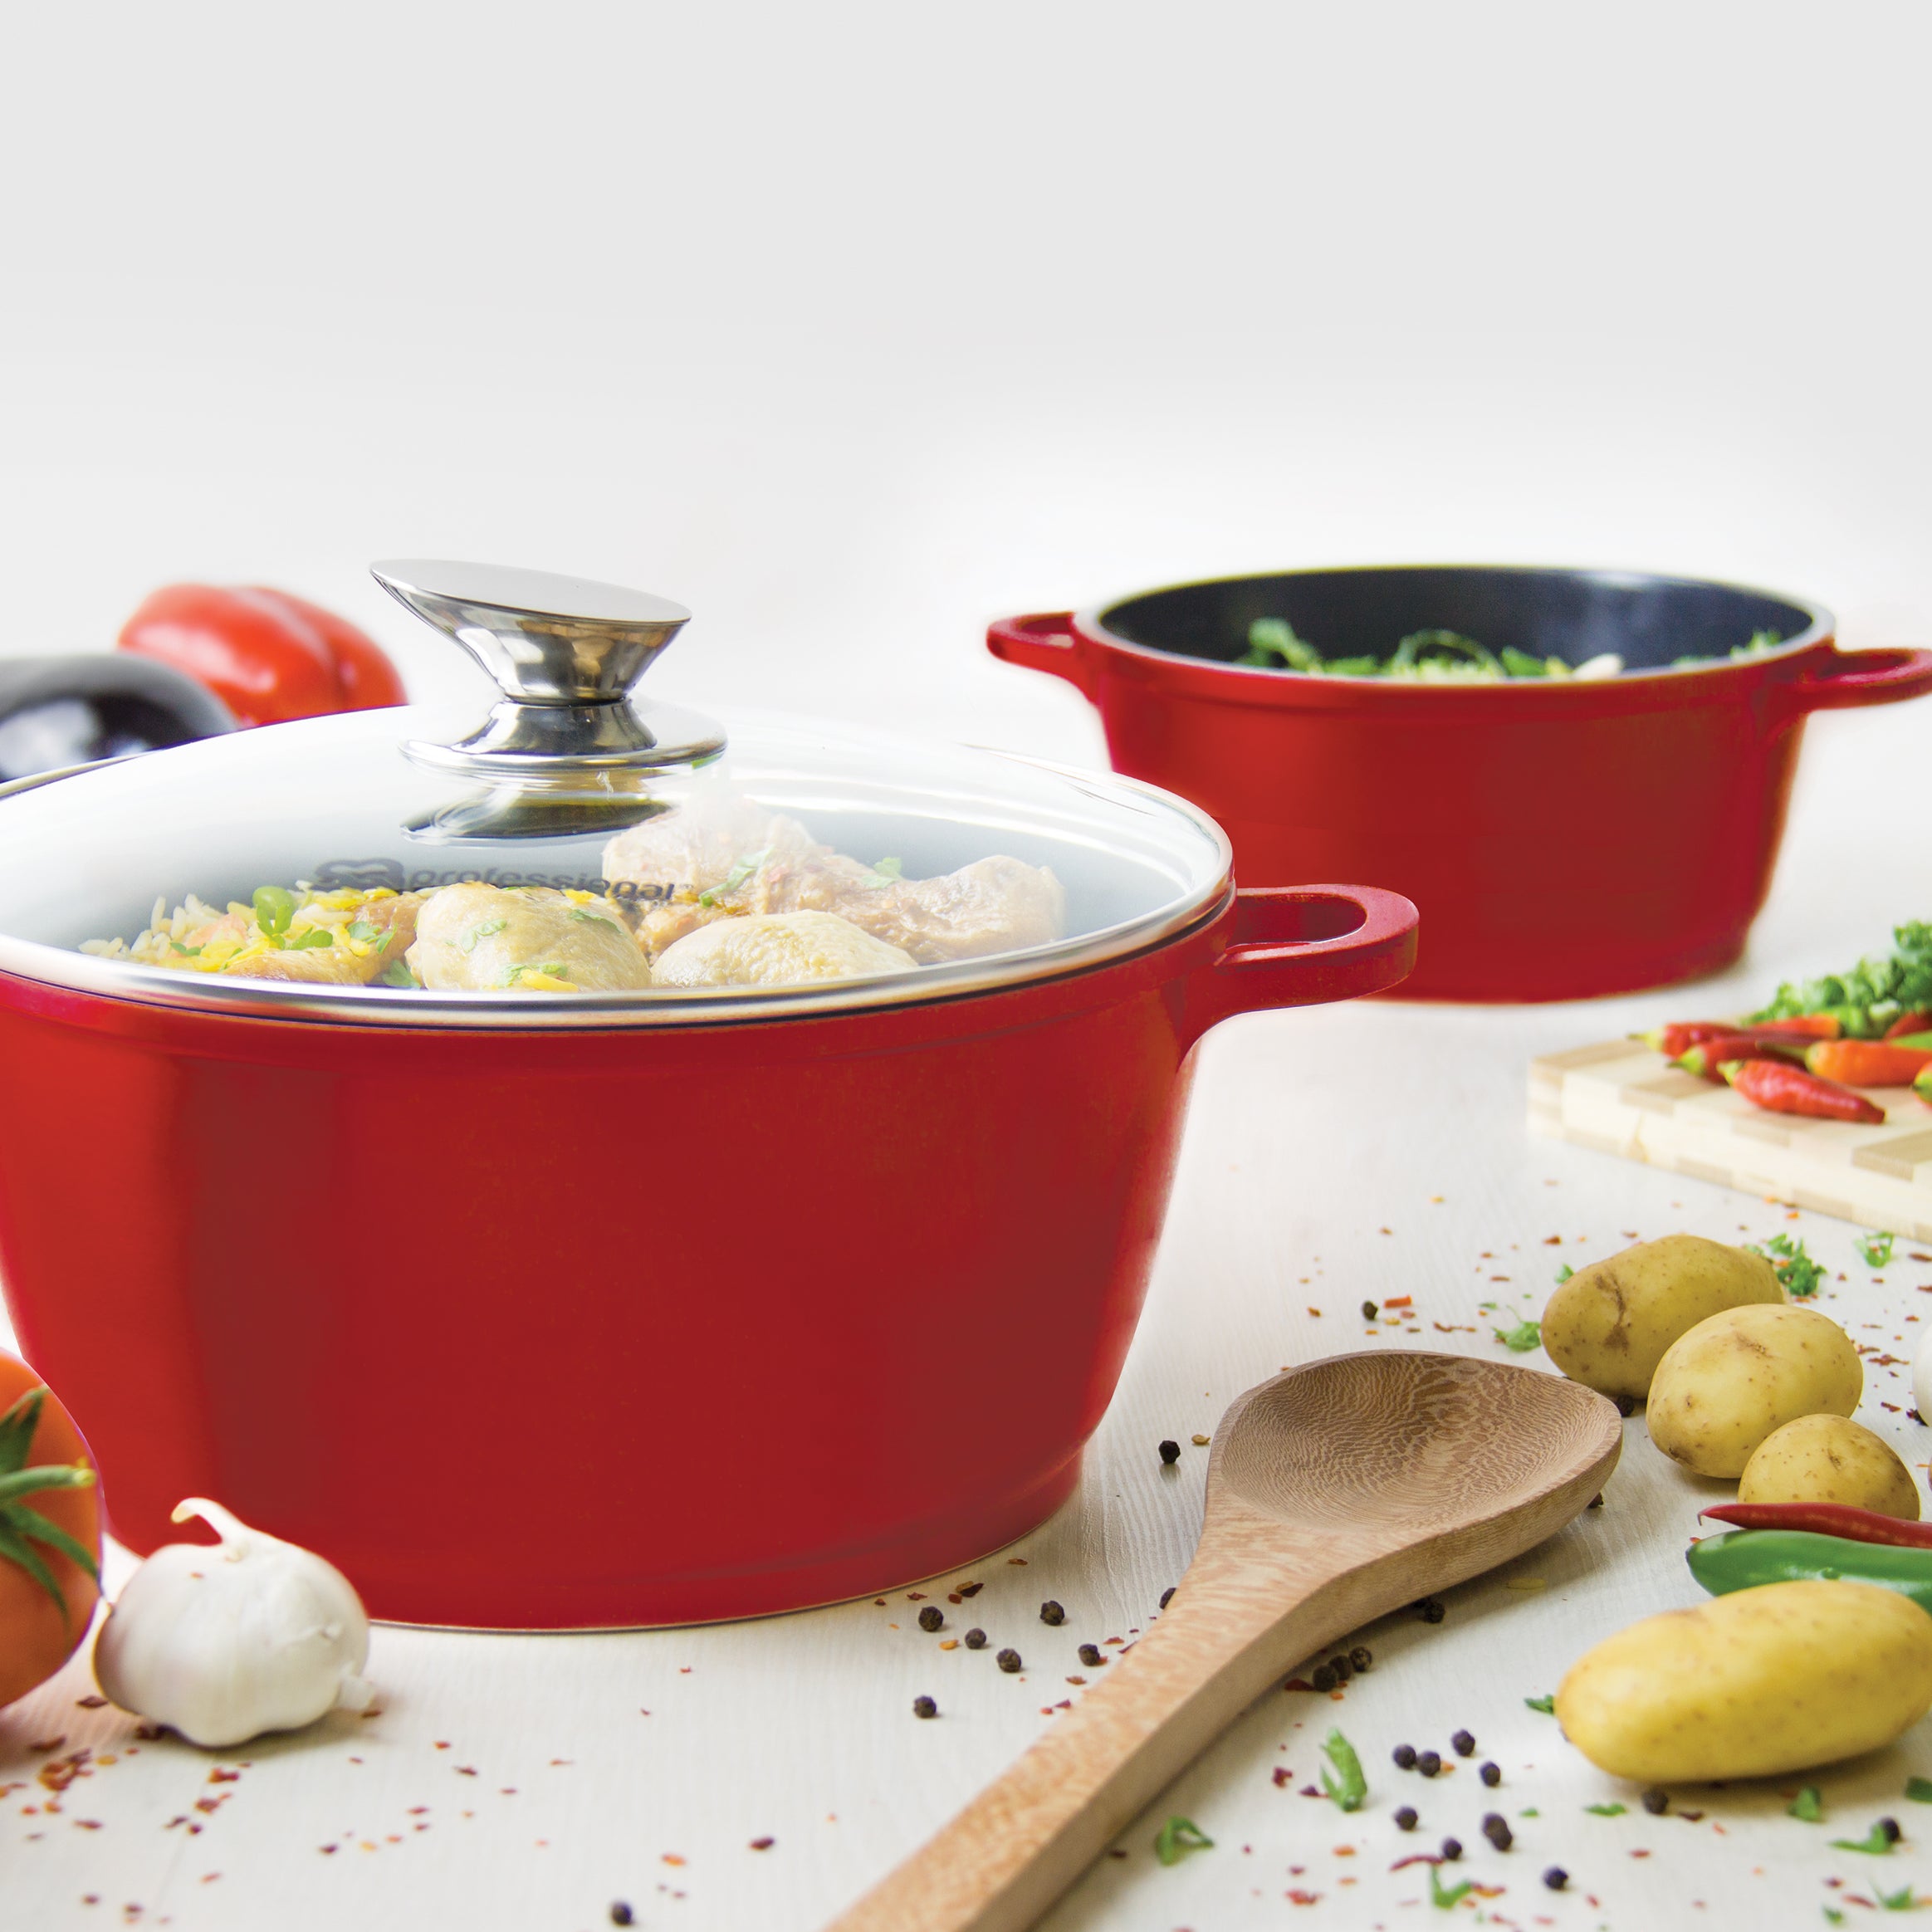 Die Cast Stockpot With Induction - NEA - Red - 20cm